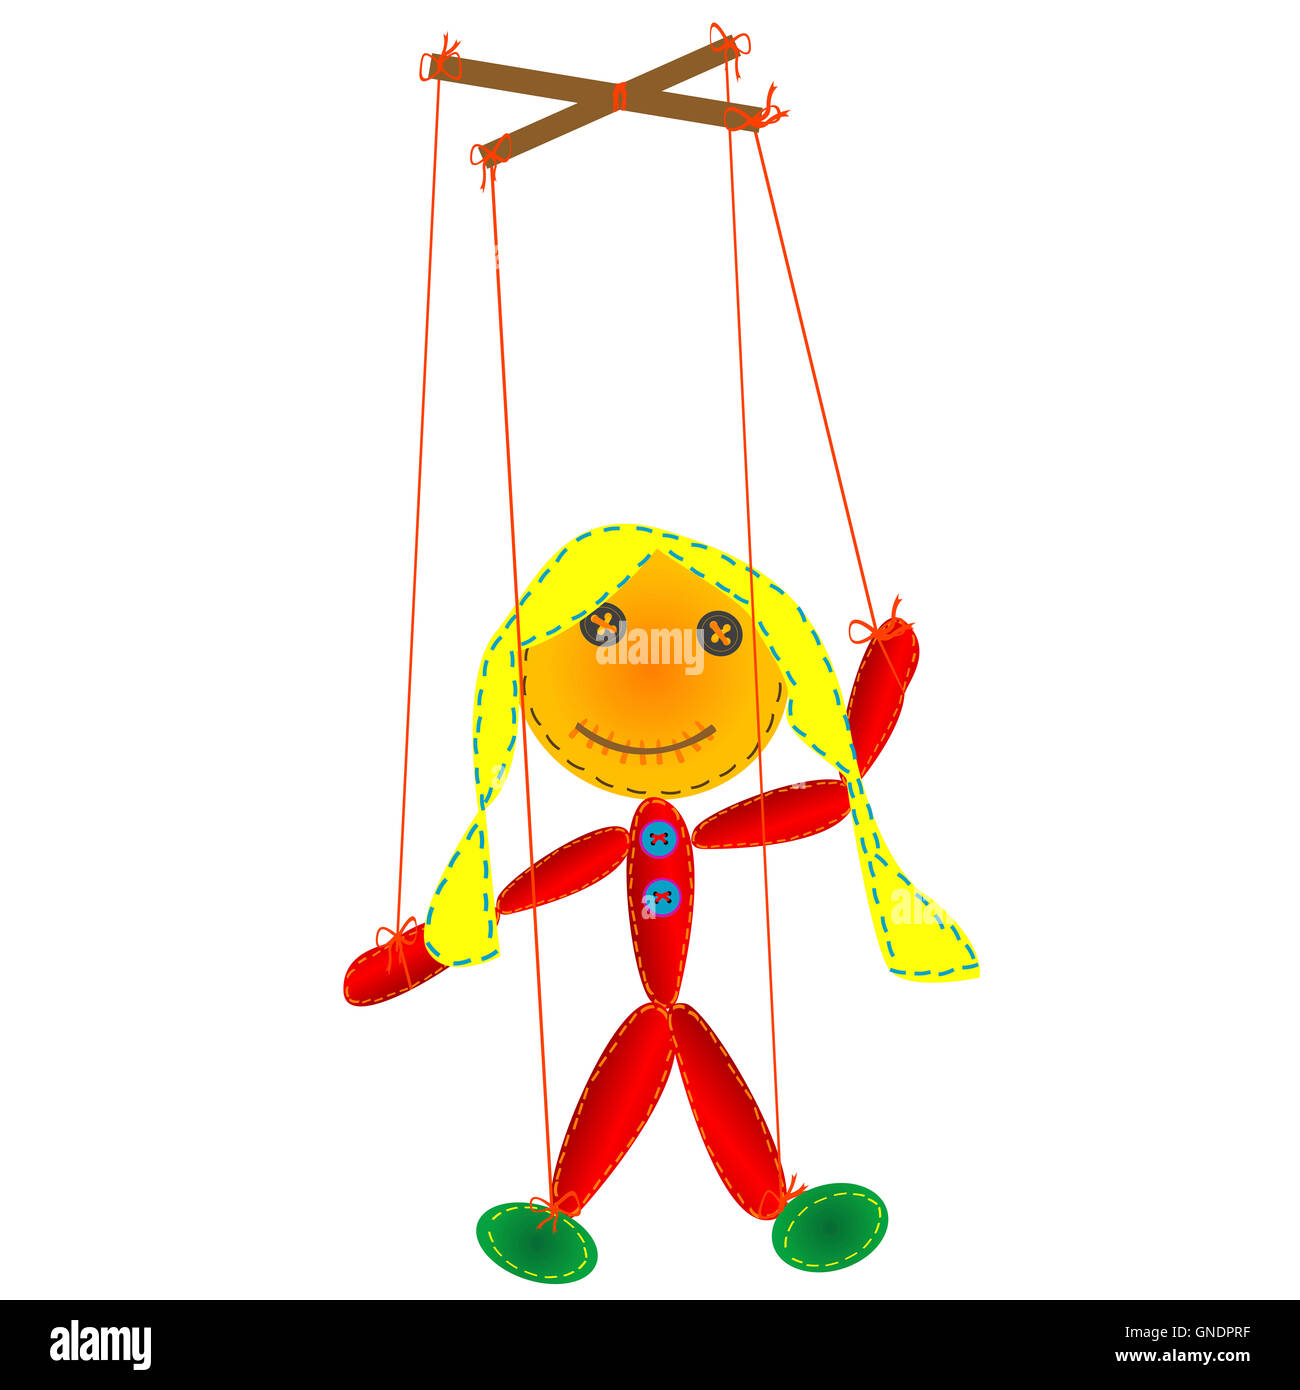 Handmade marionette, puppet on a string Stock Photo - Alamy